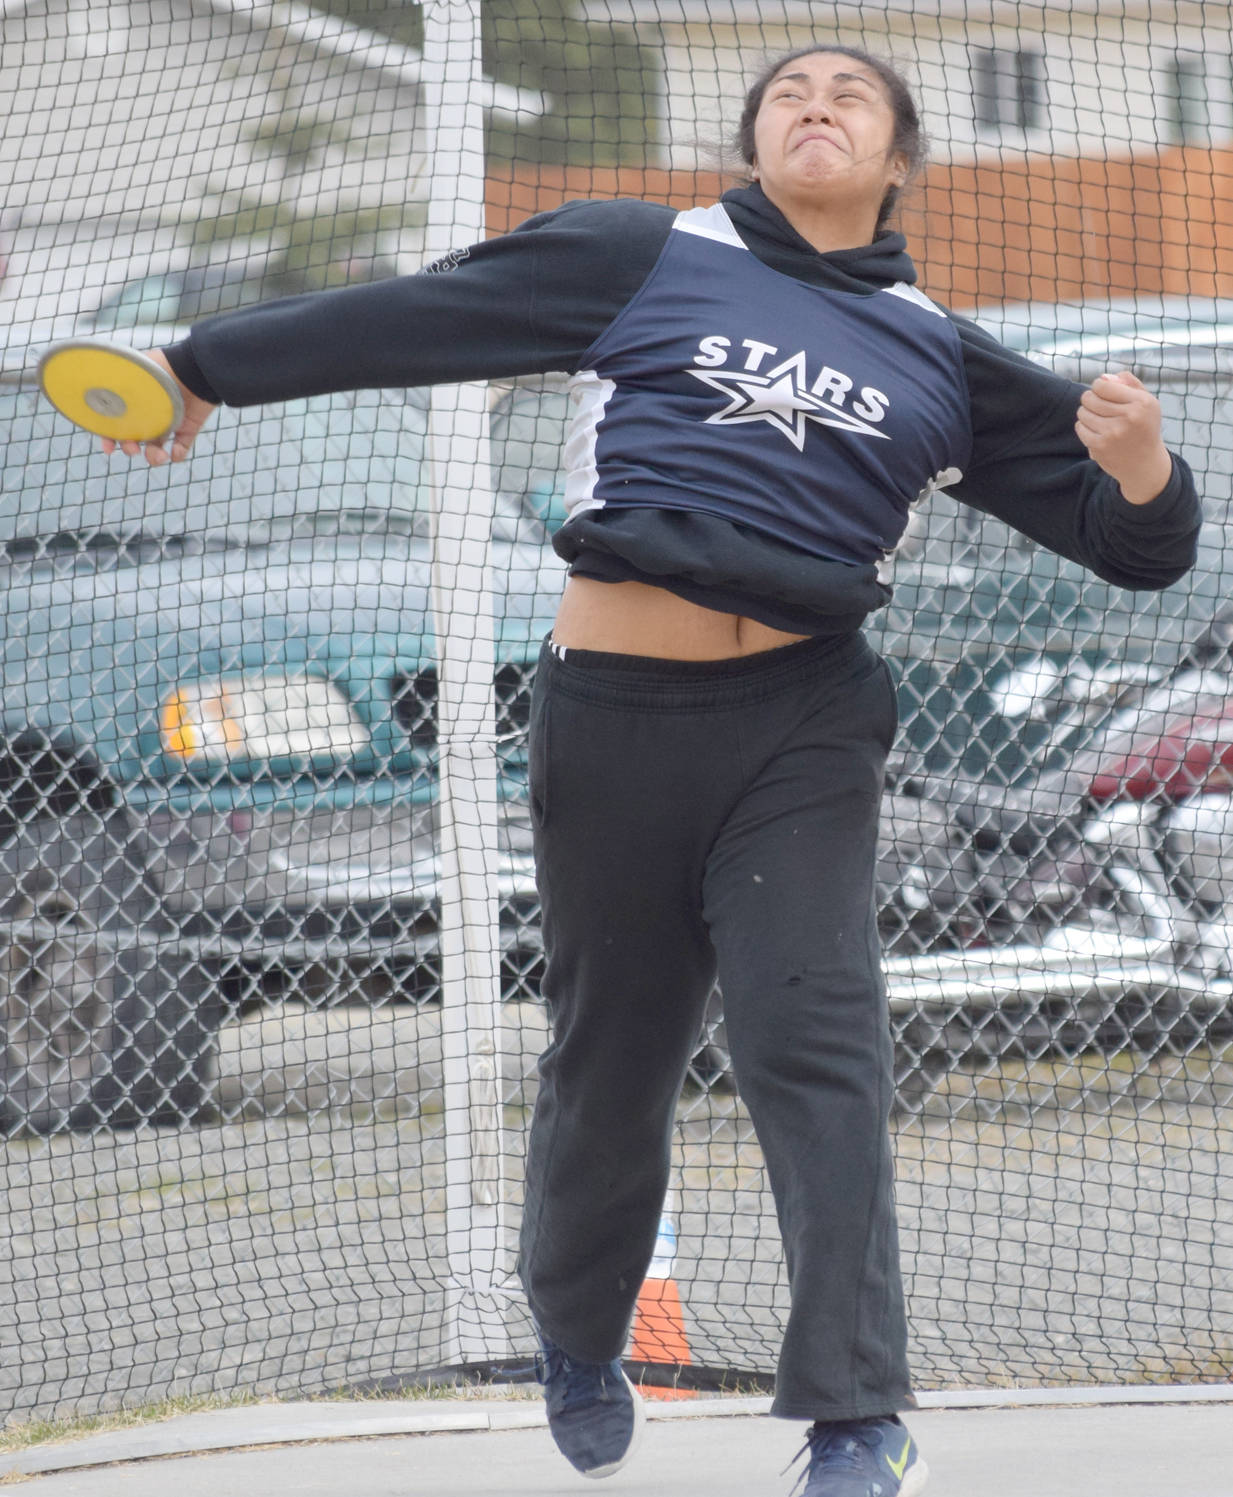 Soldotna’s Ituau Tuisaula competes in the discus Saturday, May 12, 2018, in the Kenai Peninsula Borough track and field meet at Soldotna High School. (Photo by Jeff Helminiak/Peninsula Clarion)